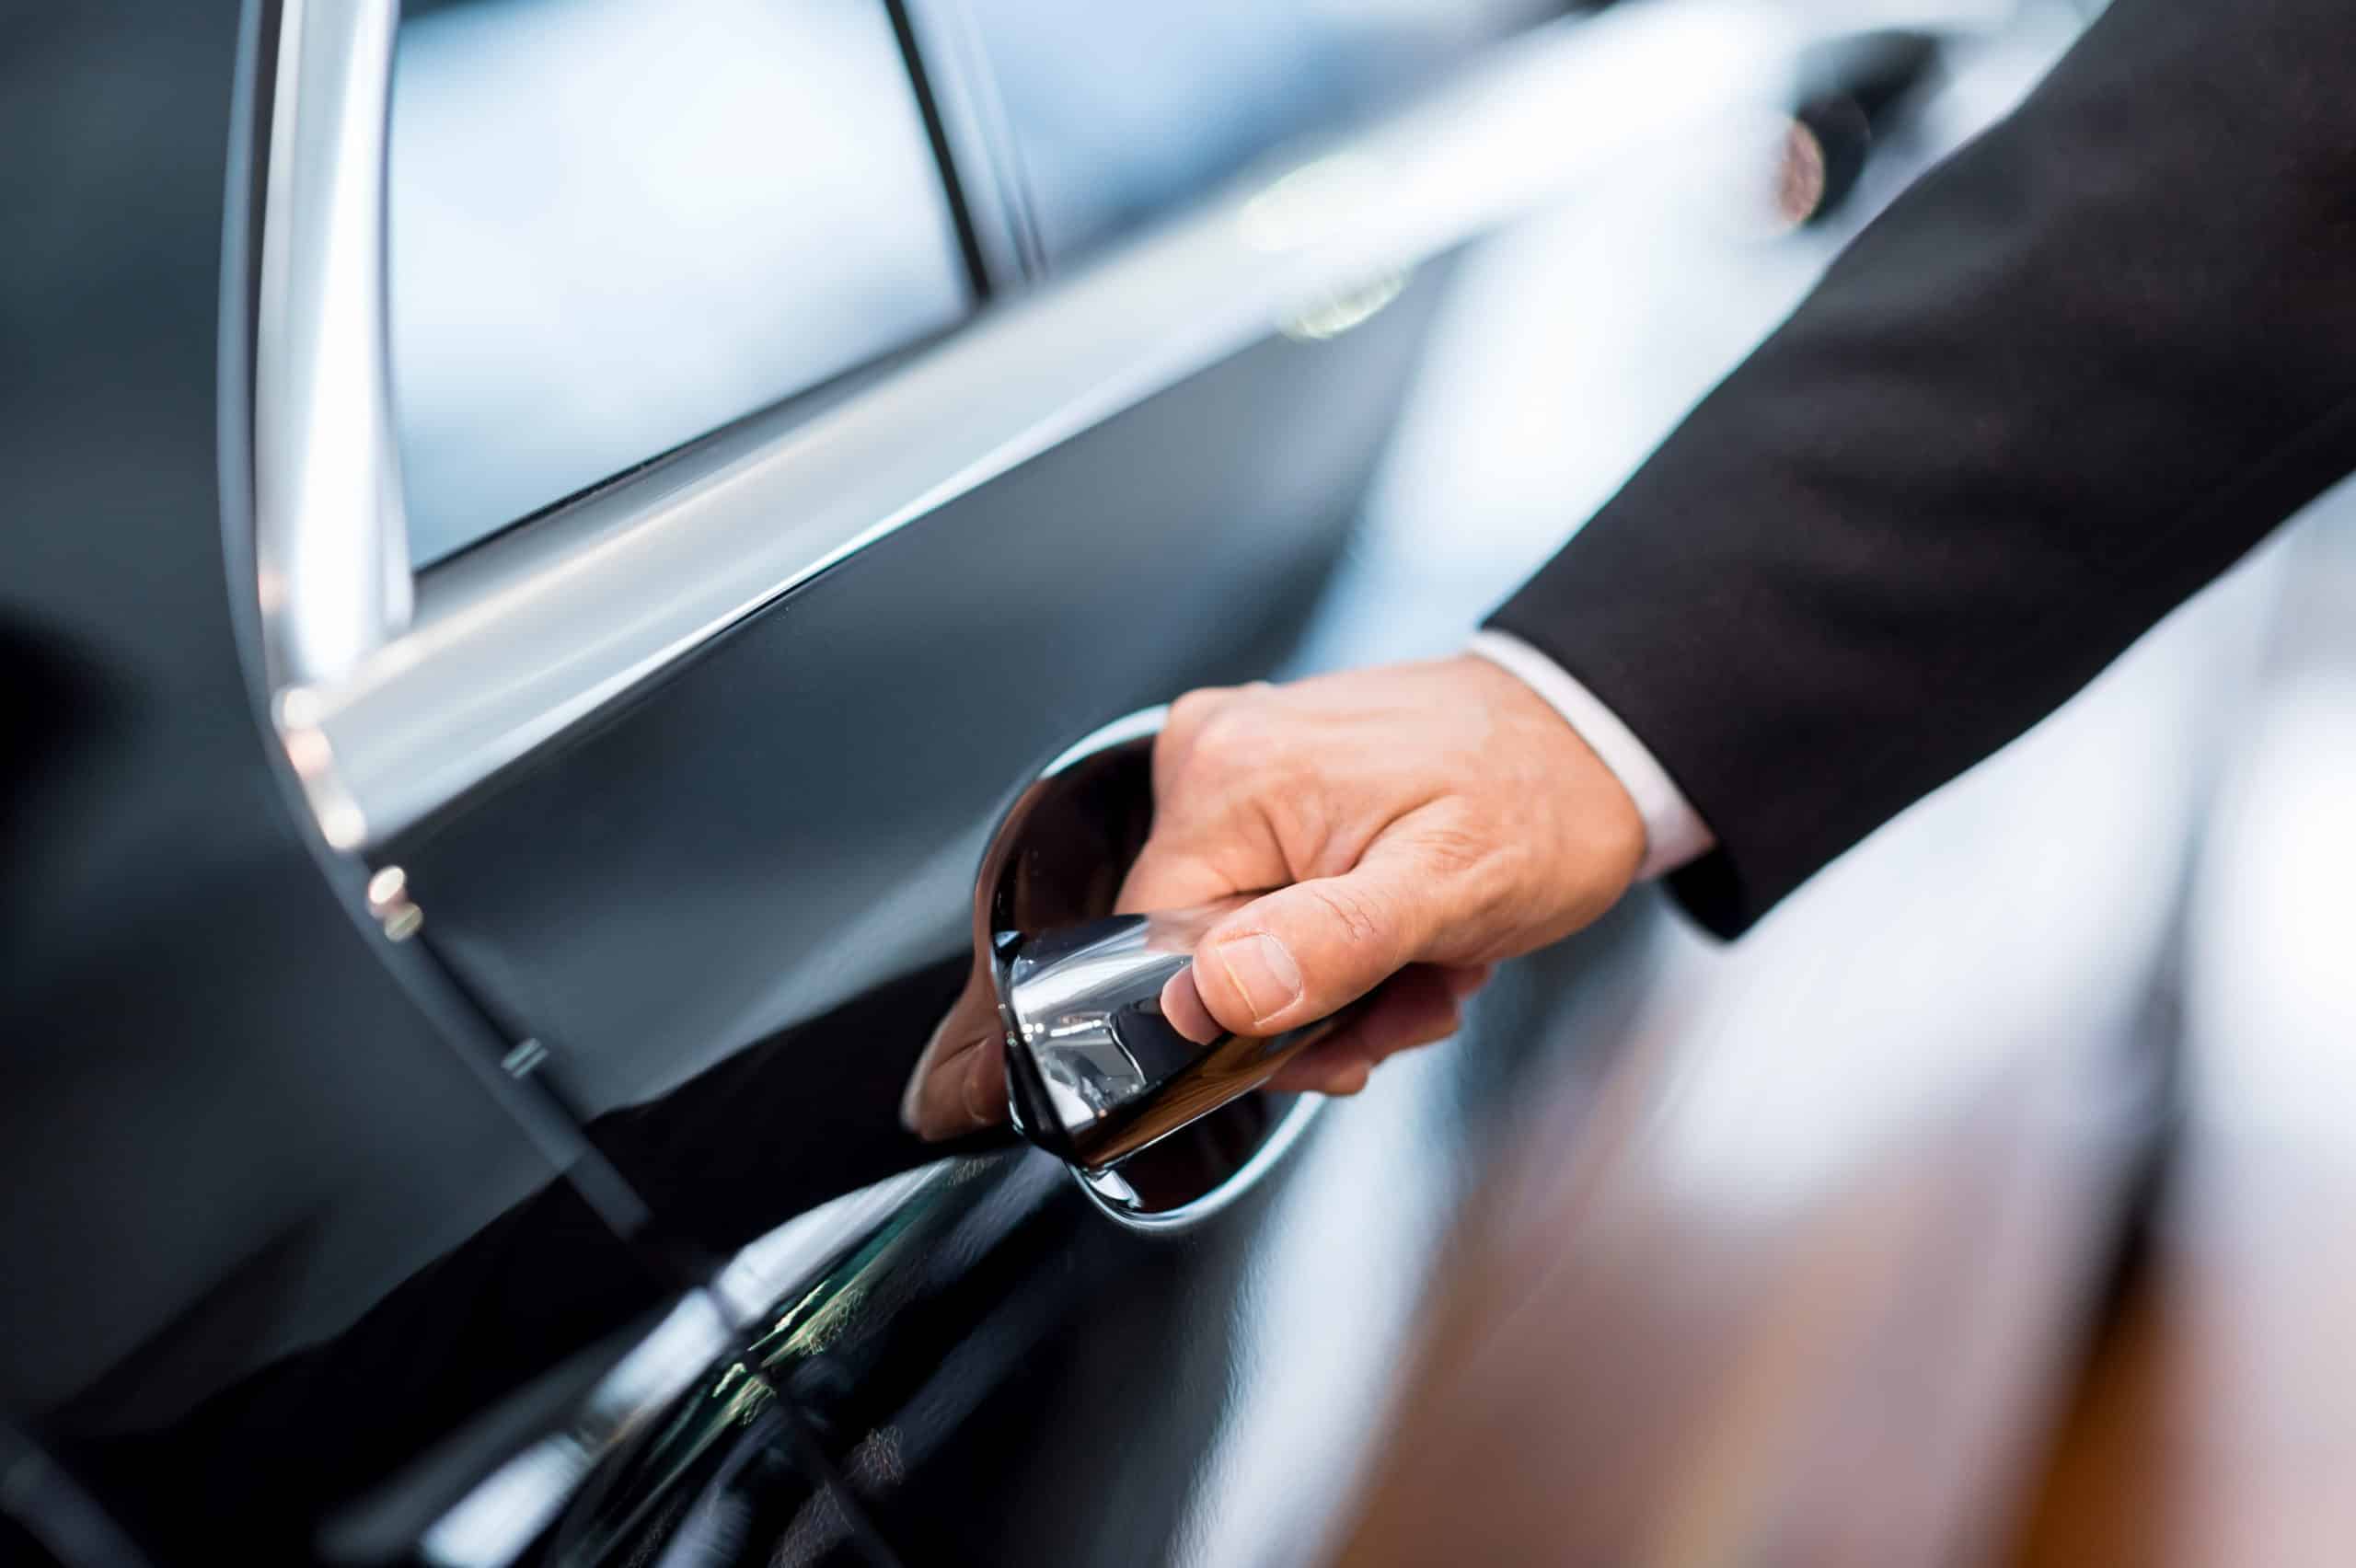 5 reasons to order transport from a representative car service